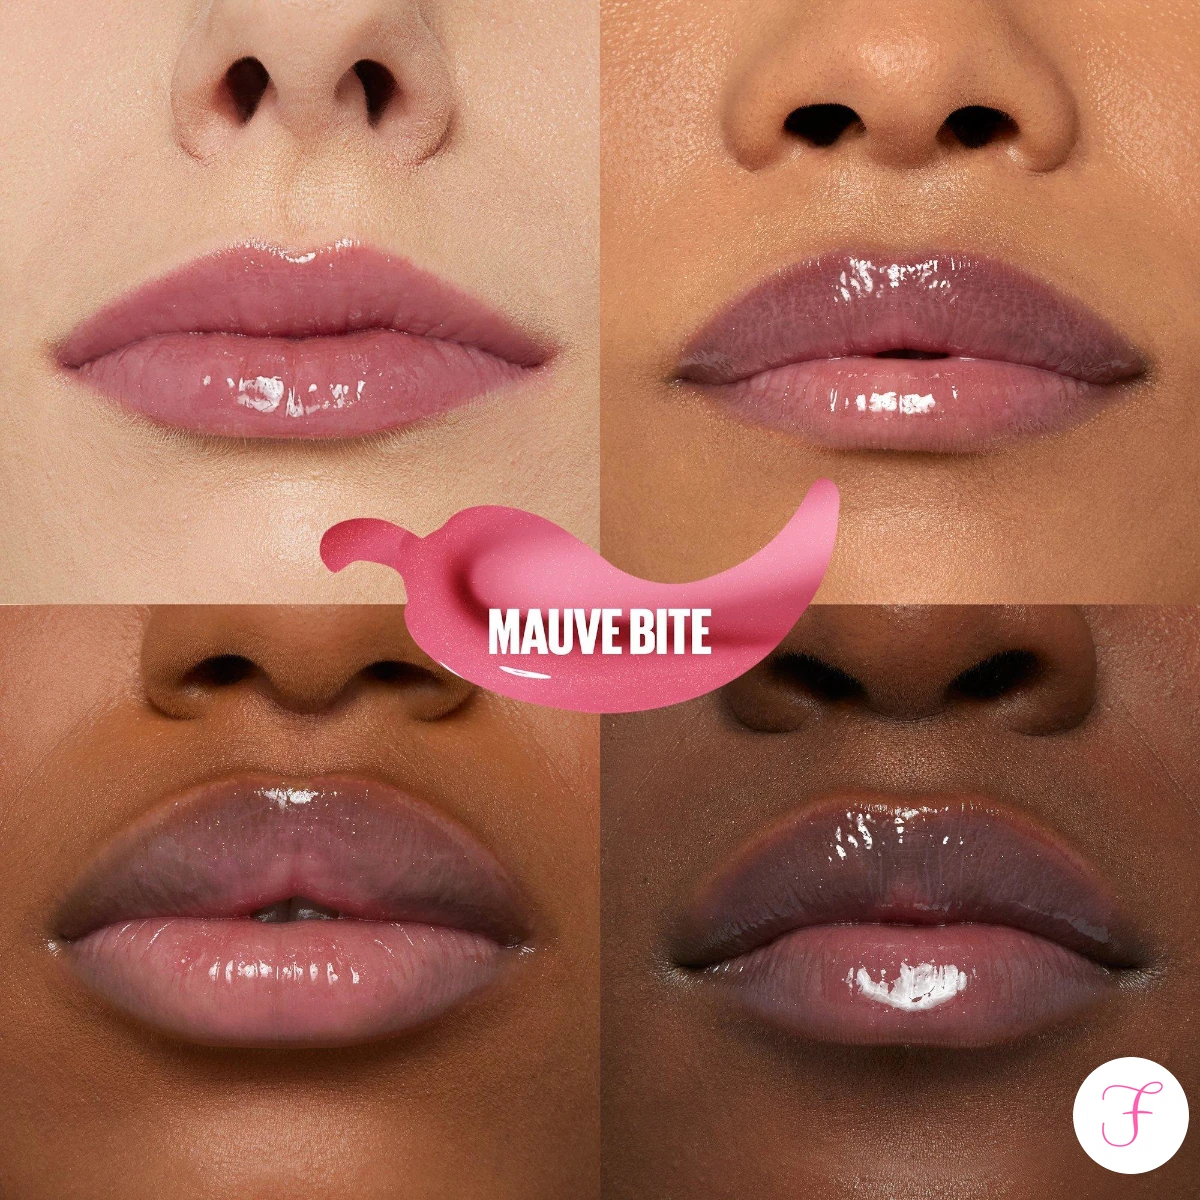 maybelline-Lifter-Plump-mauve-bite-swatches